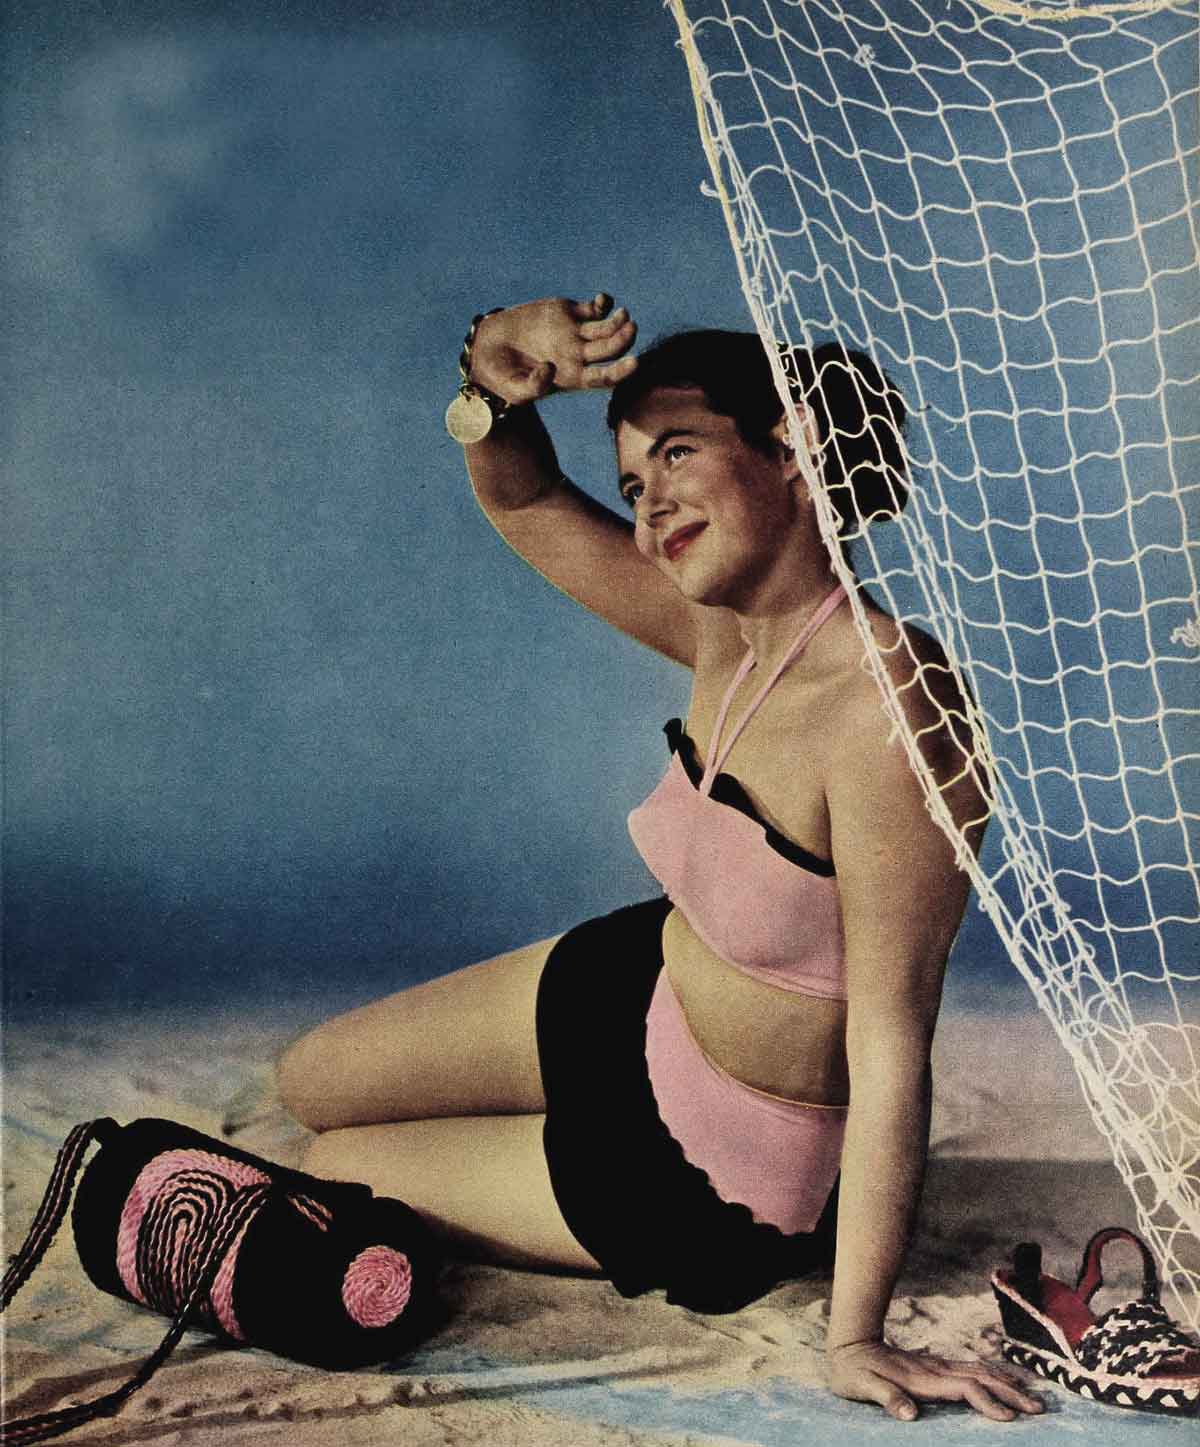 1940s-Fashion---Summer-Frock-and-Swimsuit-Styles-